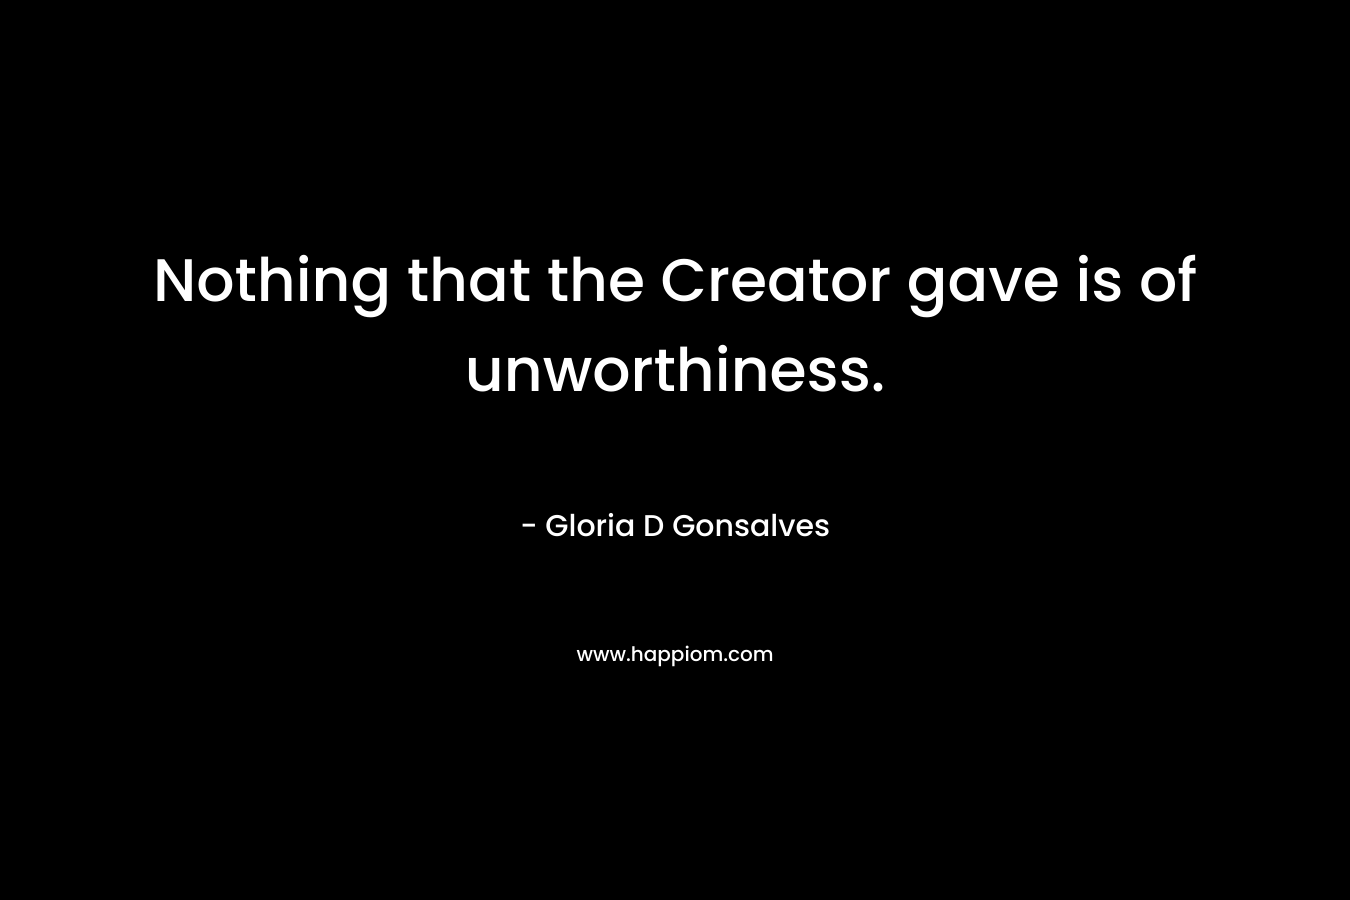 Nothing that the Creator gave is of unworthiness. – Gloria D Gonsalves